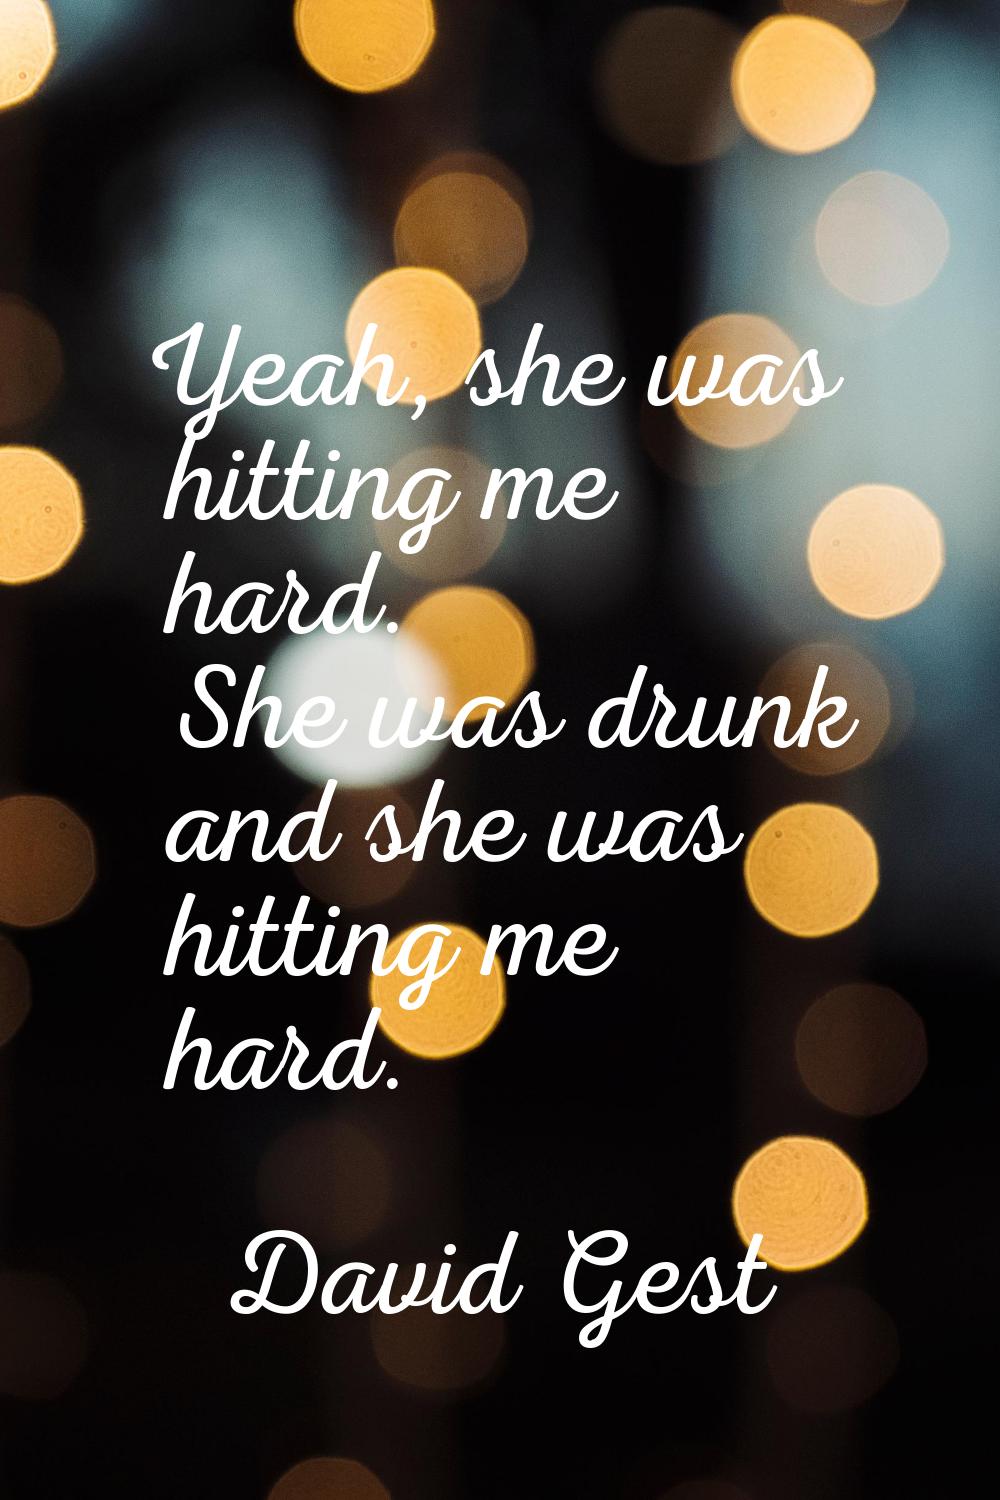 Yeah, she was hitting me hard. She was drunk and she was hitting me hard.